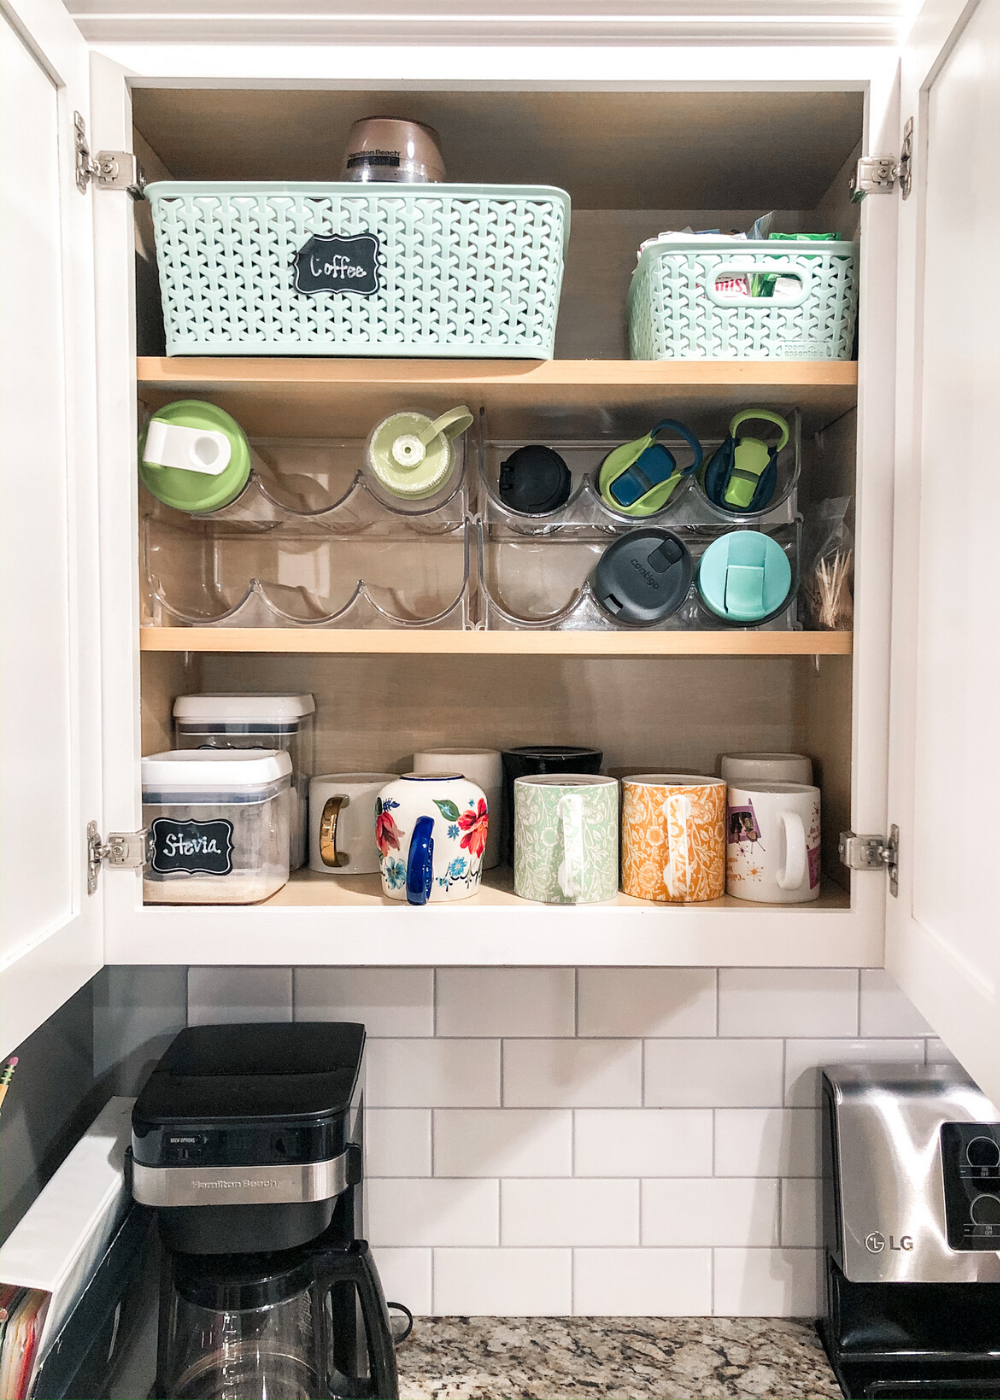 https://www.thesimplyorganizedhome.com/wp-content/uploads/2020/02/Kitchen-Organization-Coffee-Cabinet.png